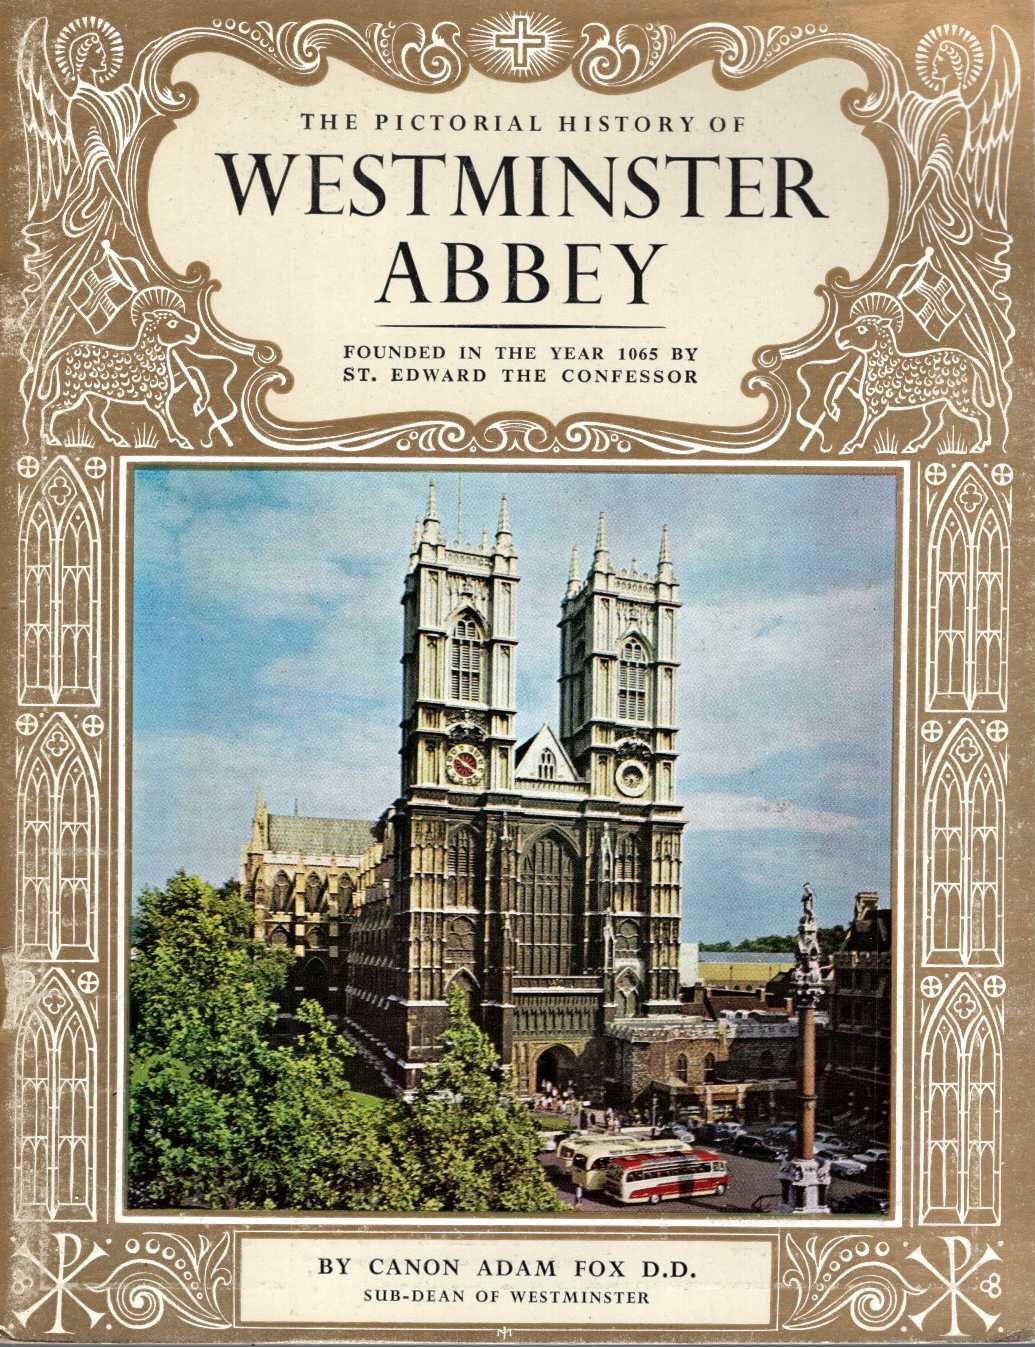 \ WESTMINSTER ABBEY, The Pictorial History of by Canon Adam Fox front book cover image